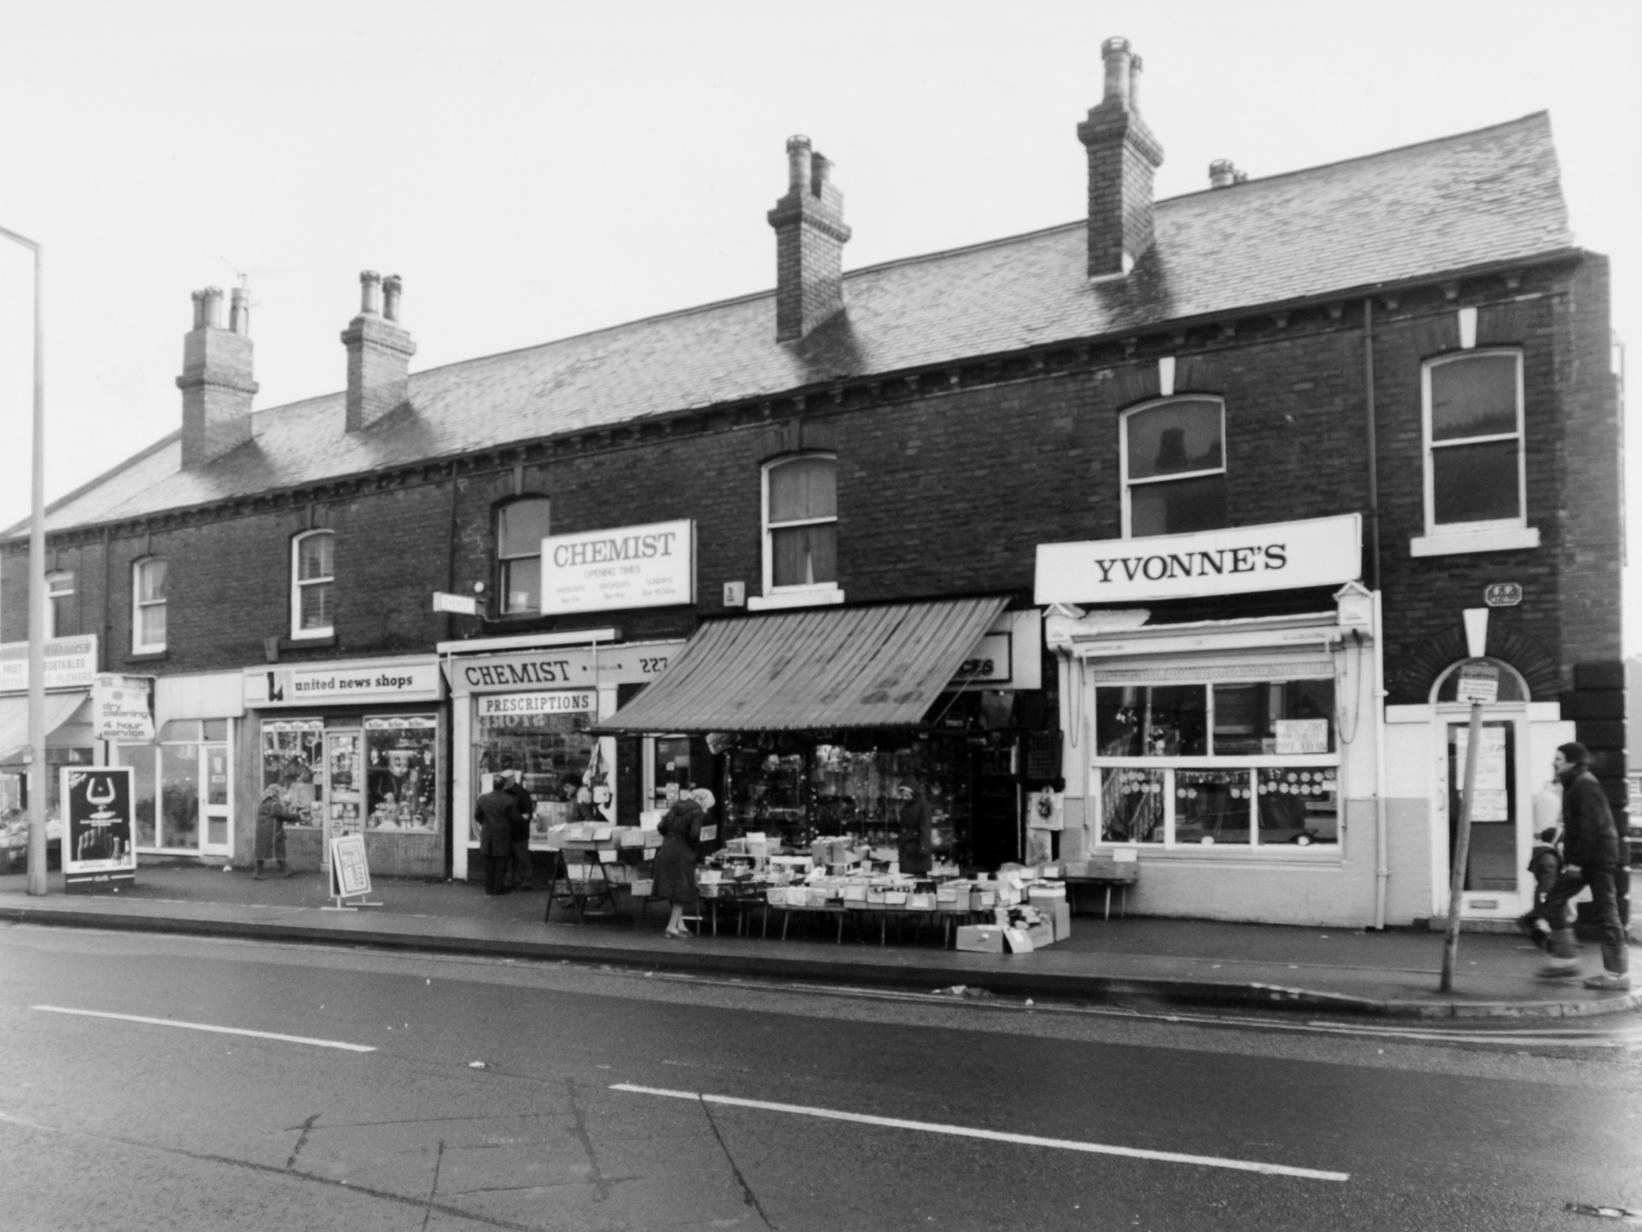 Did you visit these shops back in the day?